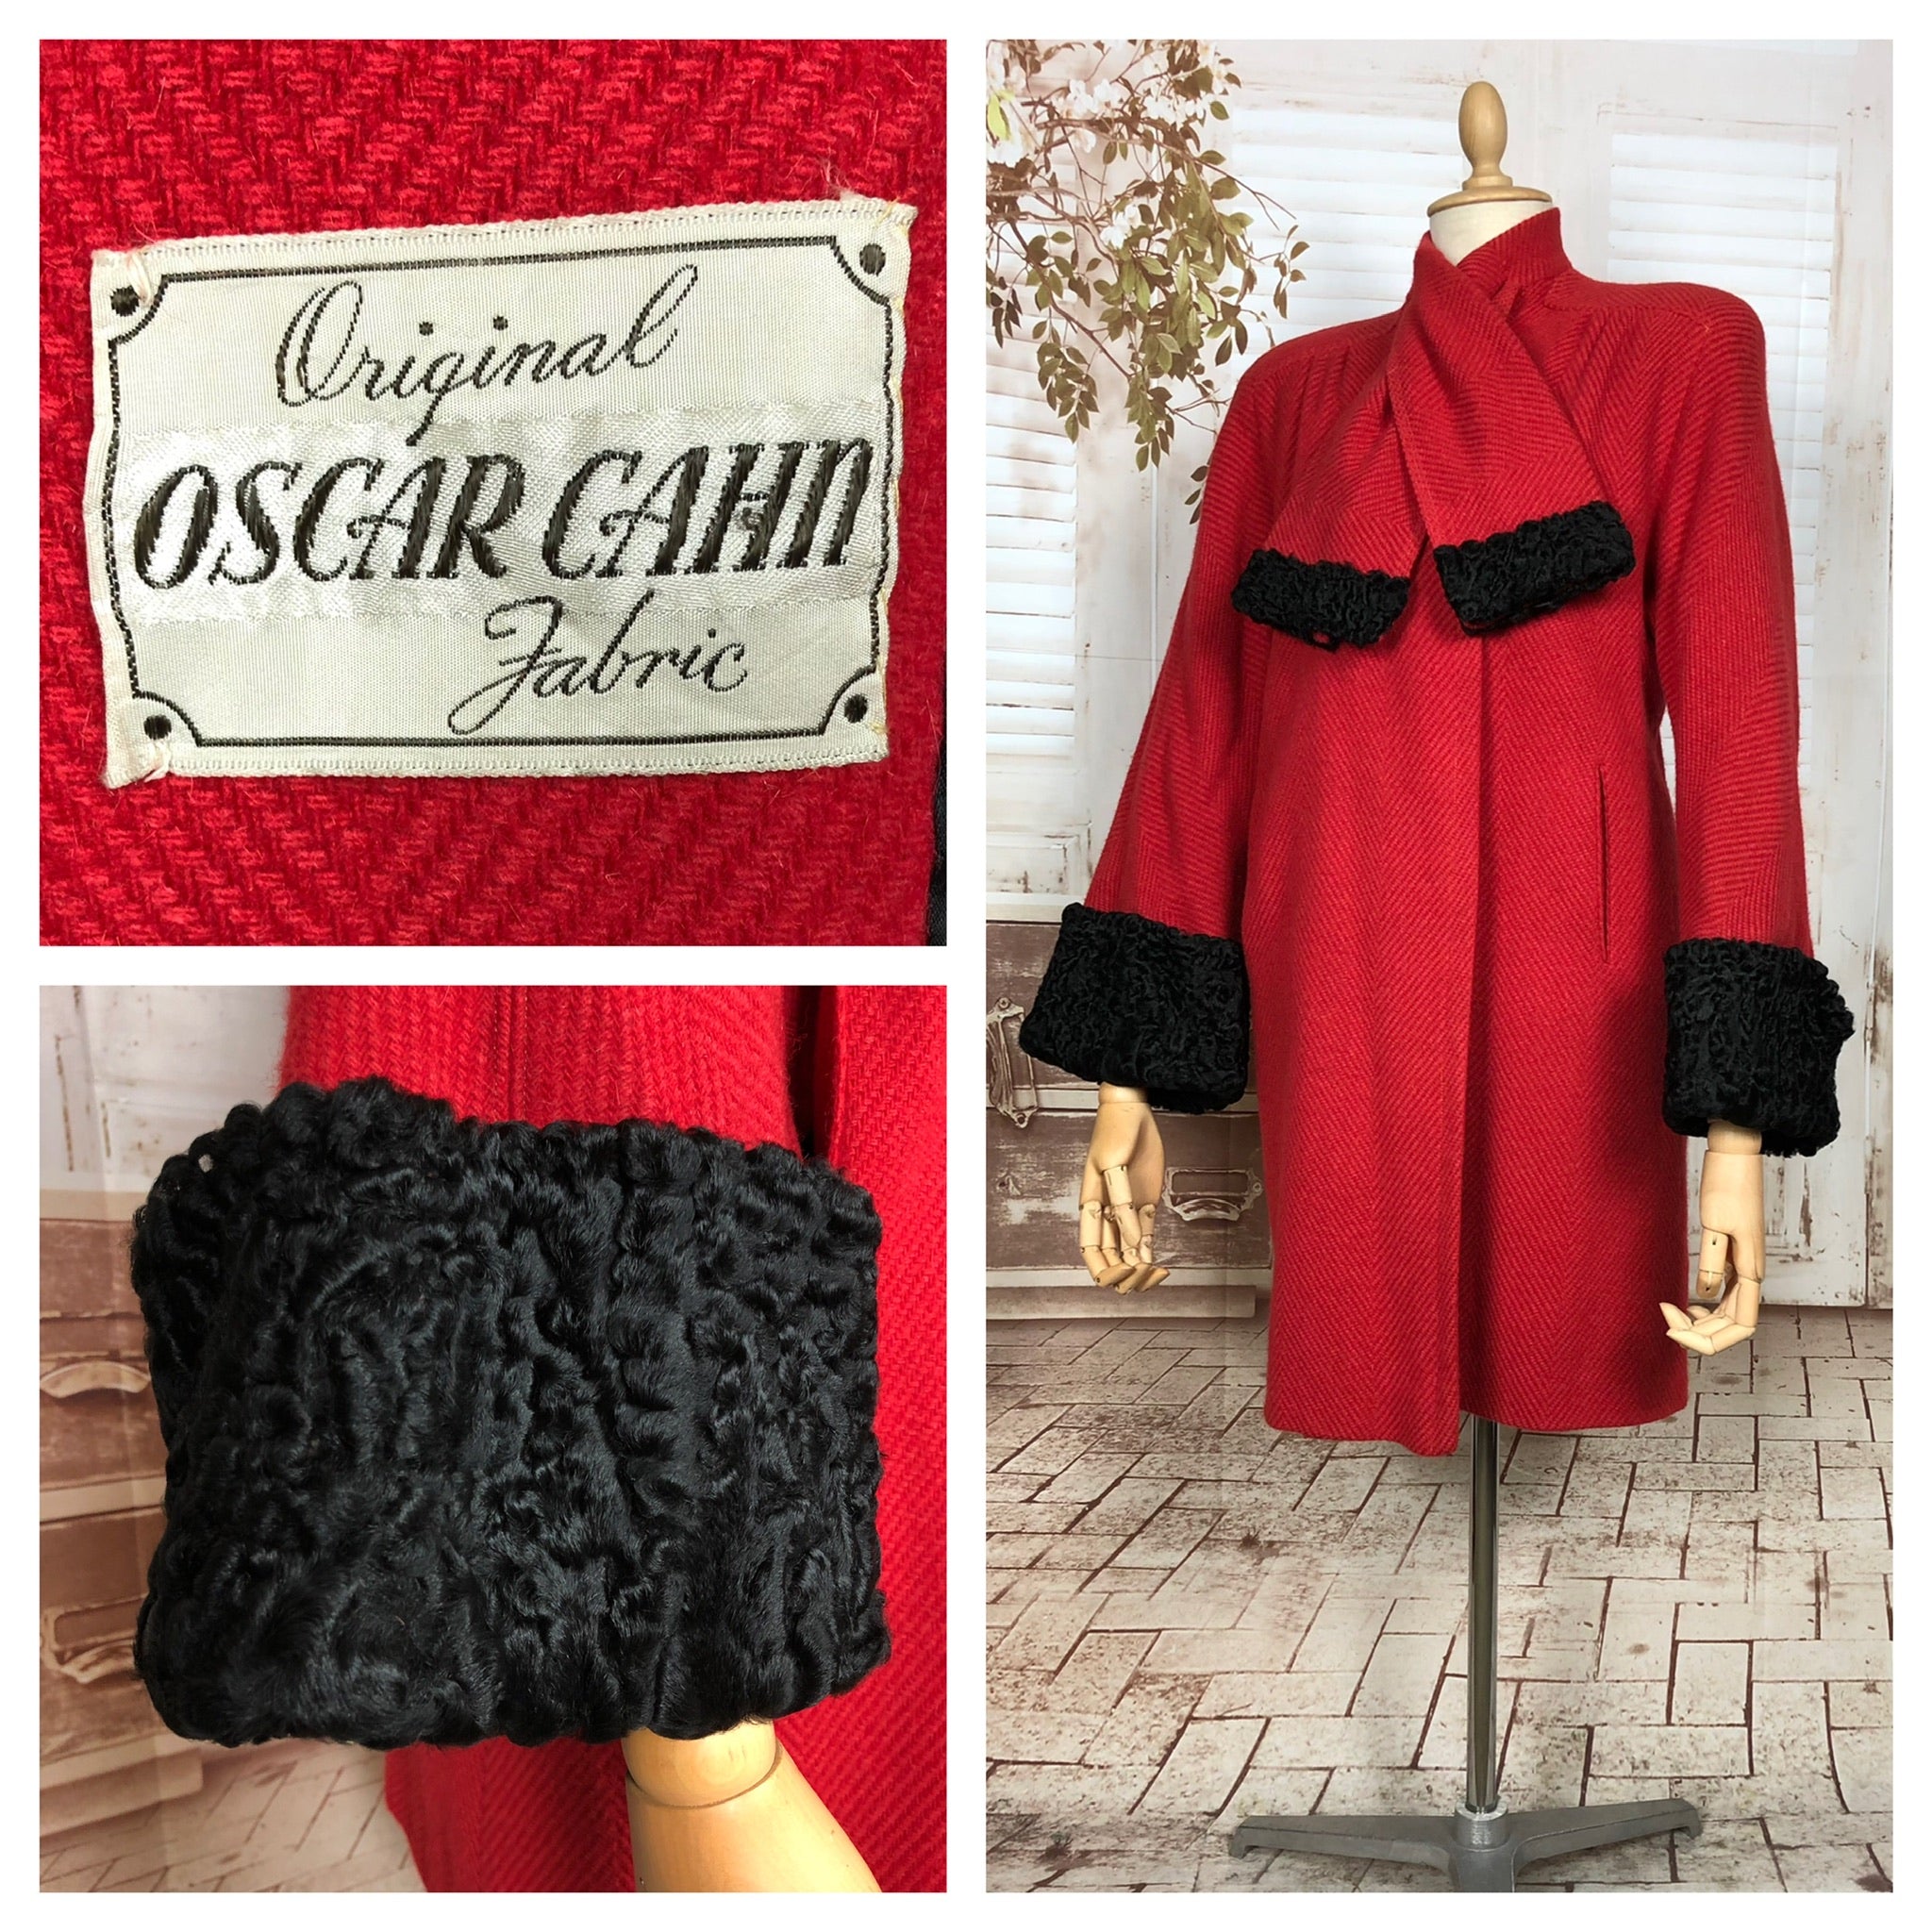 Incredible Rare Original 1940s Vintage Red Chevron Wool Couture Coat By Oscar Cahn